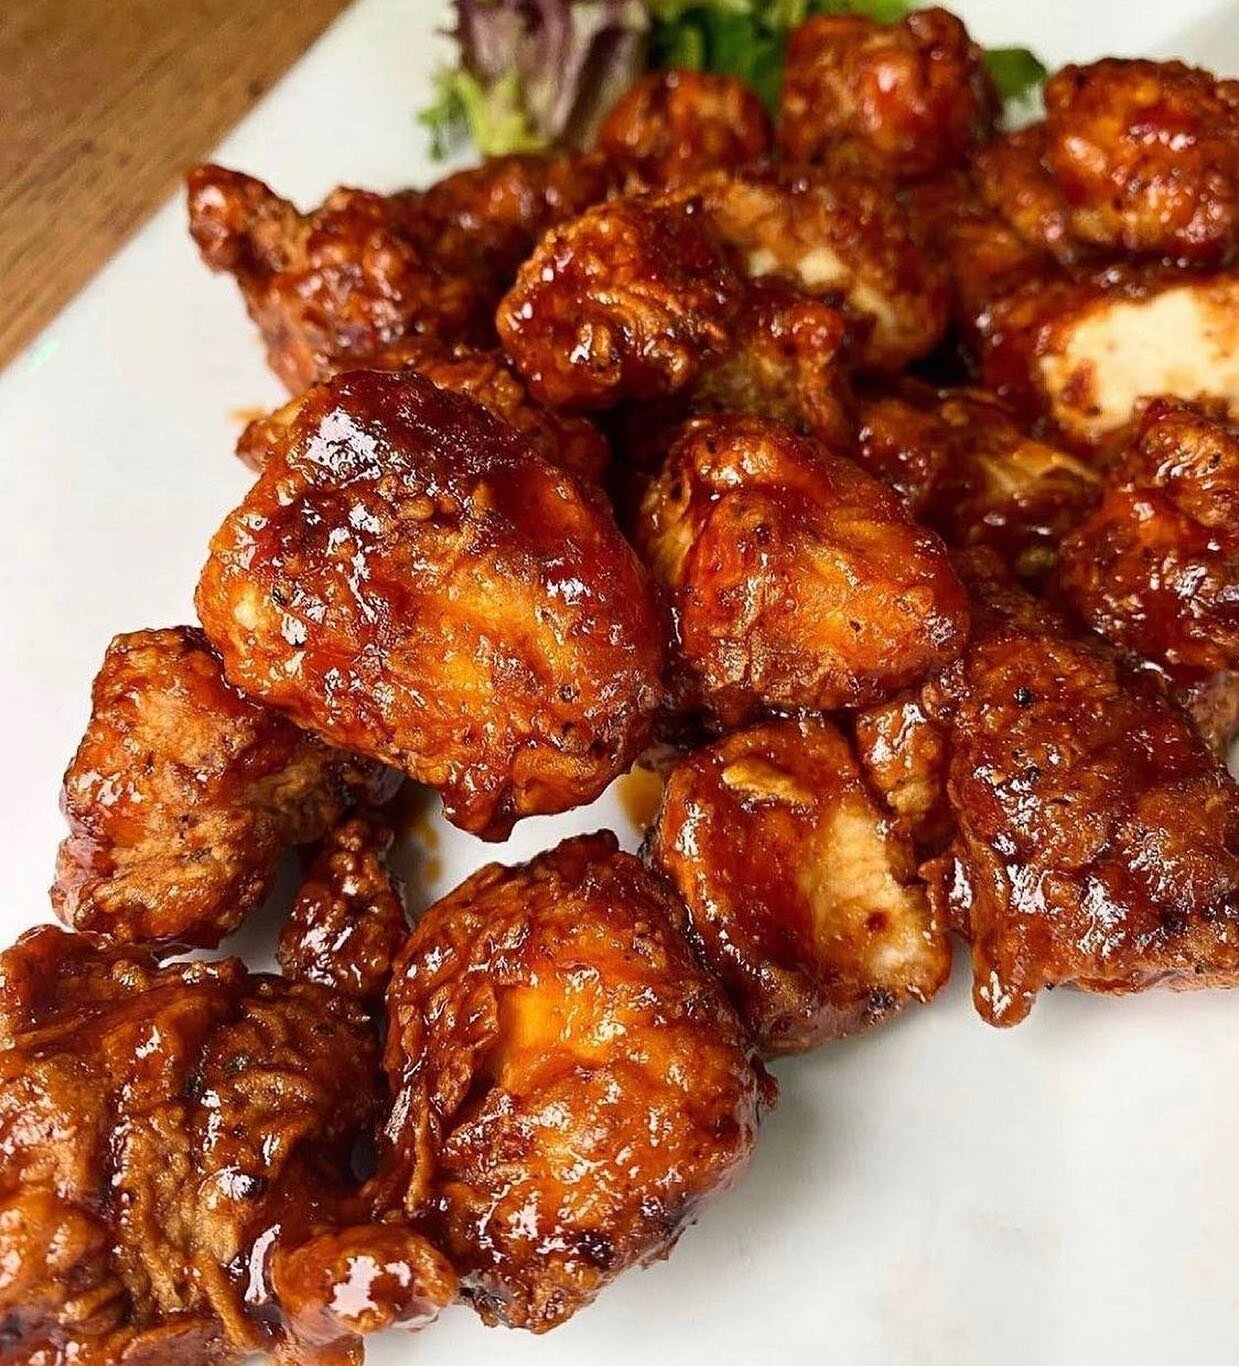 It&rsquo;s a DK chicken bite world and we&rsquo;re just living in it. We&rsquo;re open at 12pm today for lunch and day drinking&hellip;Bring your work, call out sick, whatever you need to do to come have some fun this afternoon. We&rsquo;ll see ya so